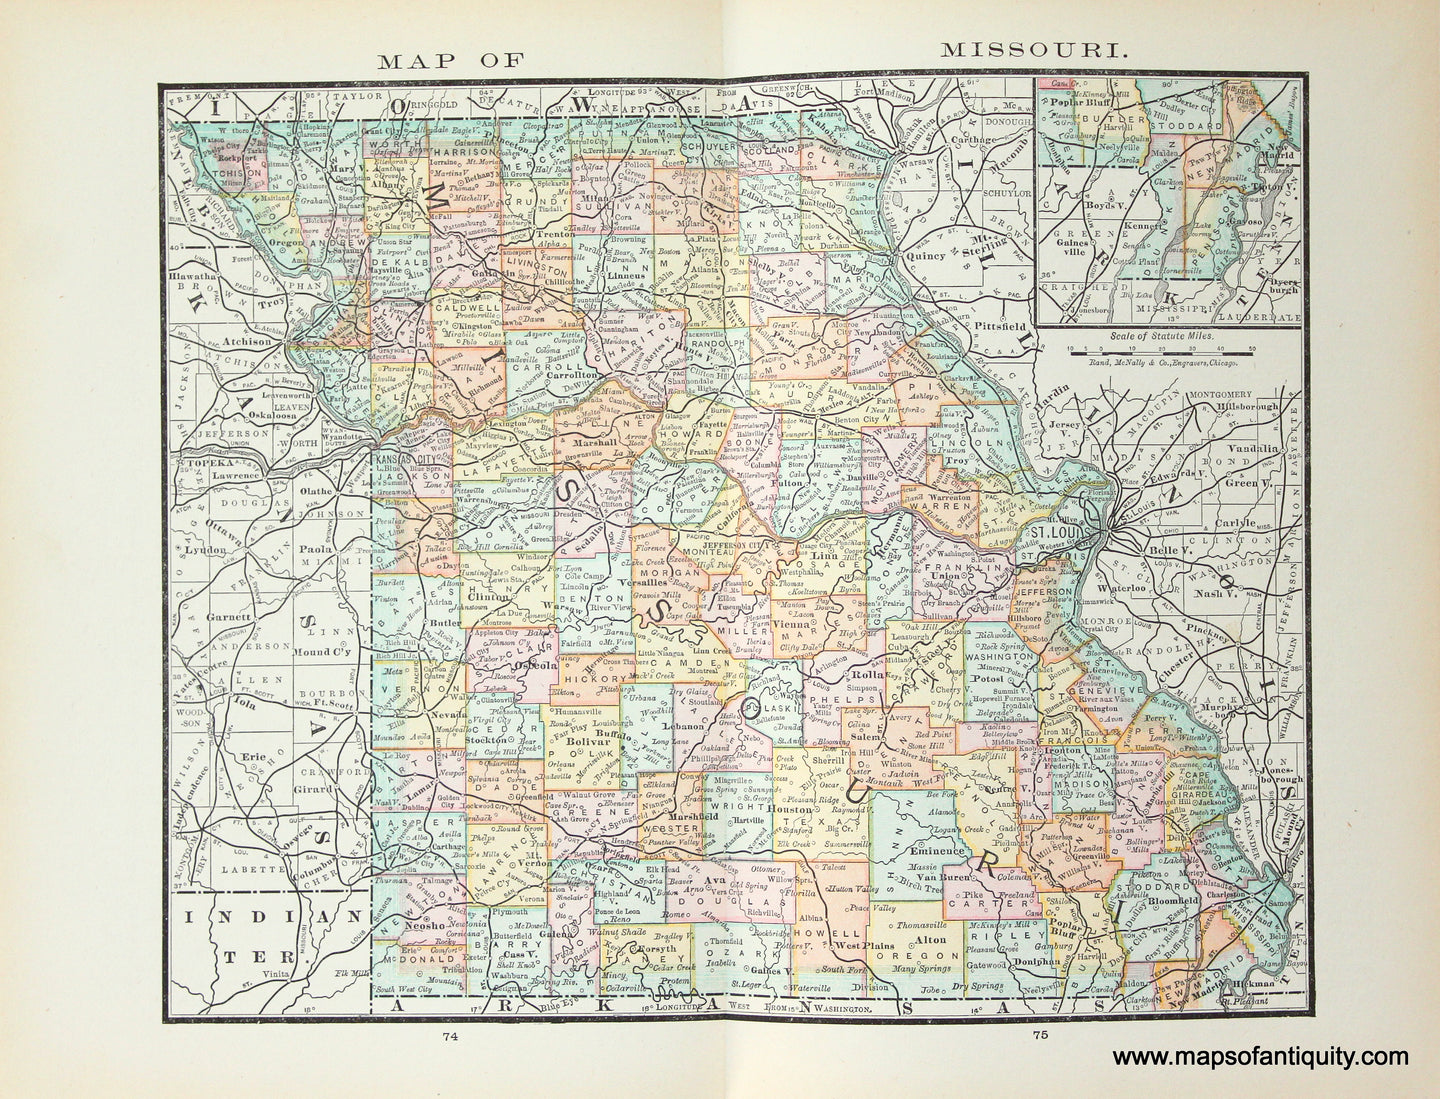 Genuine Antique Map-Map of Missouri-1884-Rand McNally & Co-Maps-Of-Antiquity